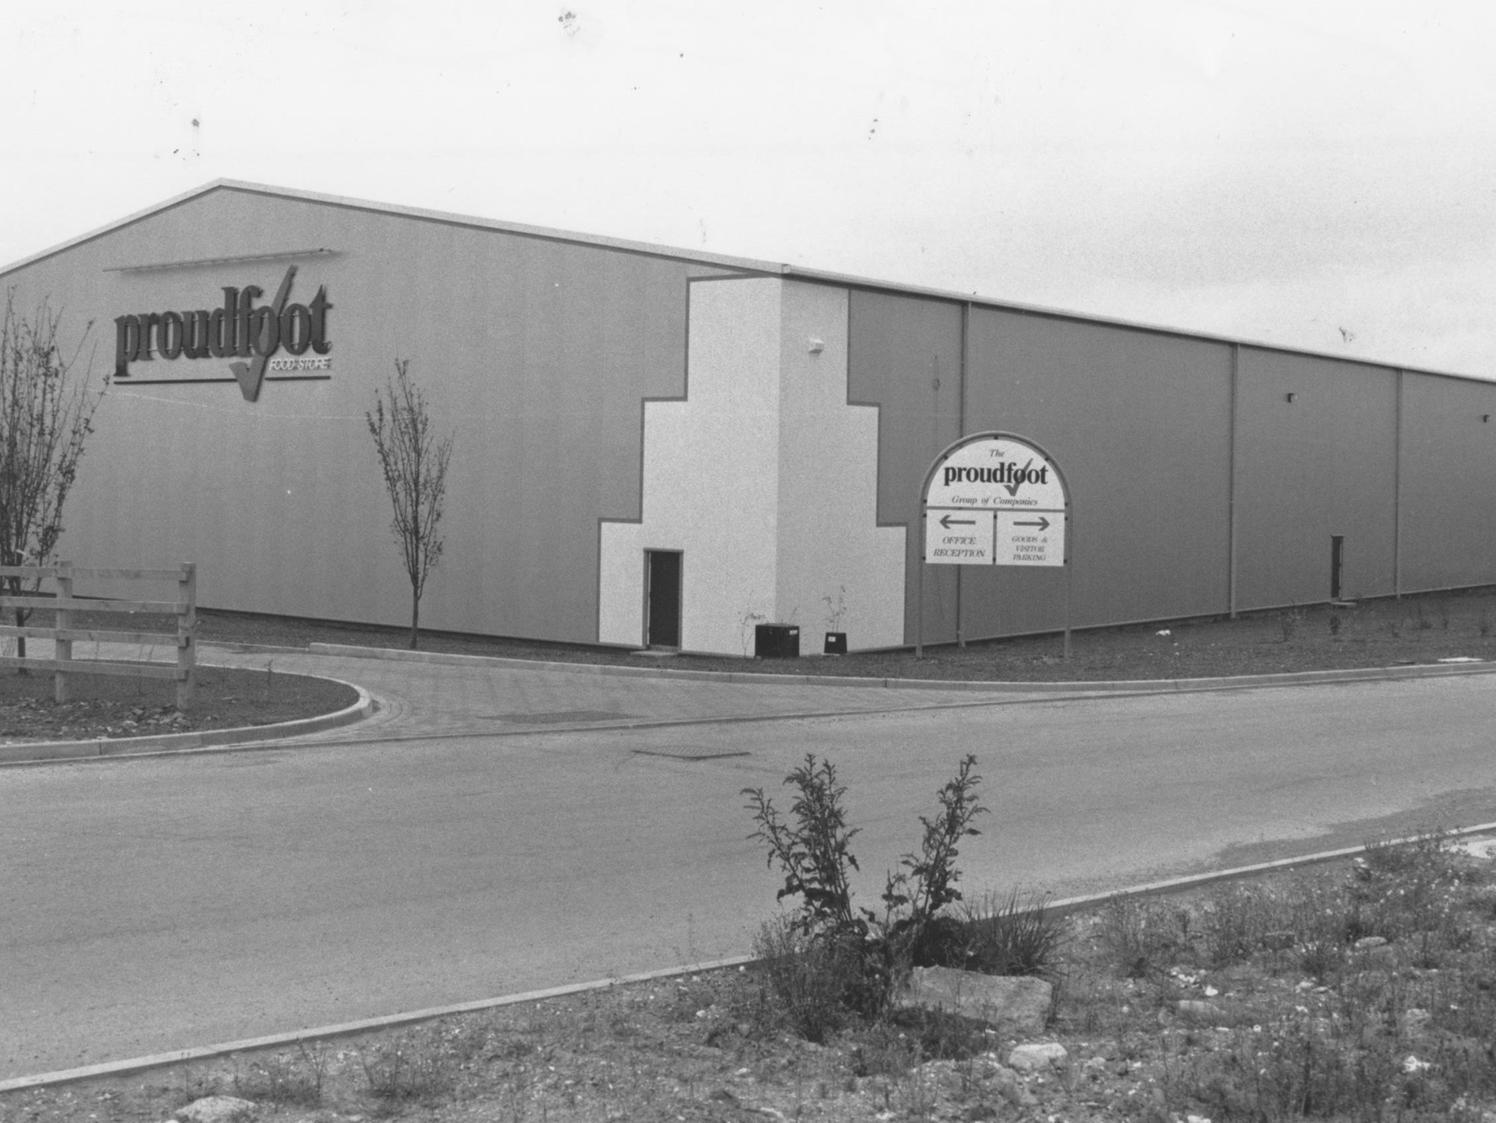 The Eastfield warehouse in 1992 soon after its opening